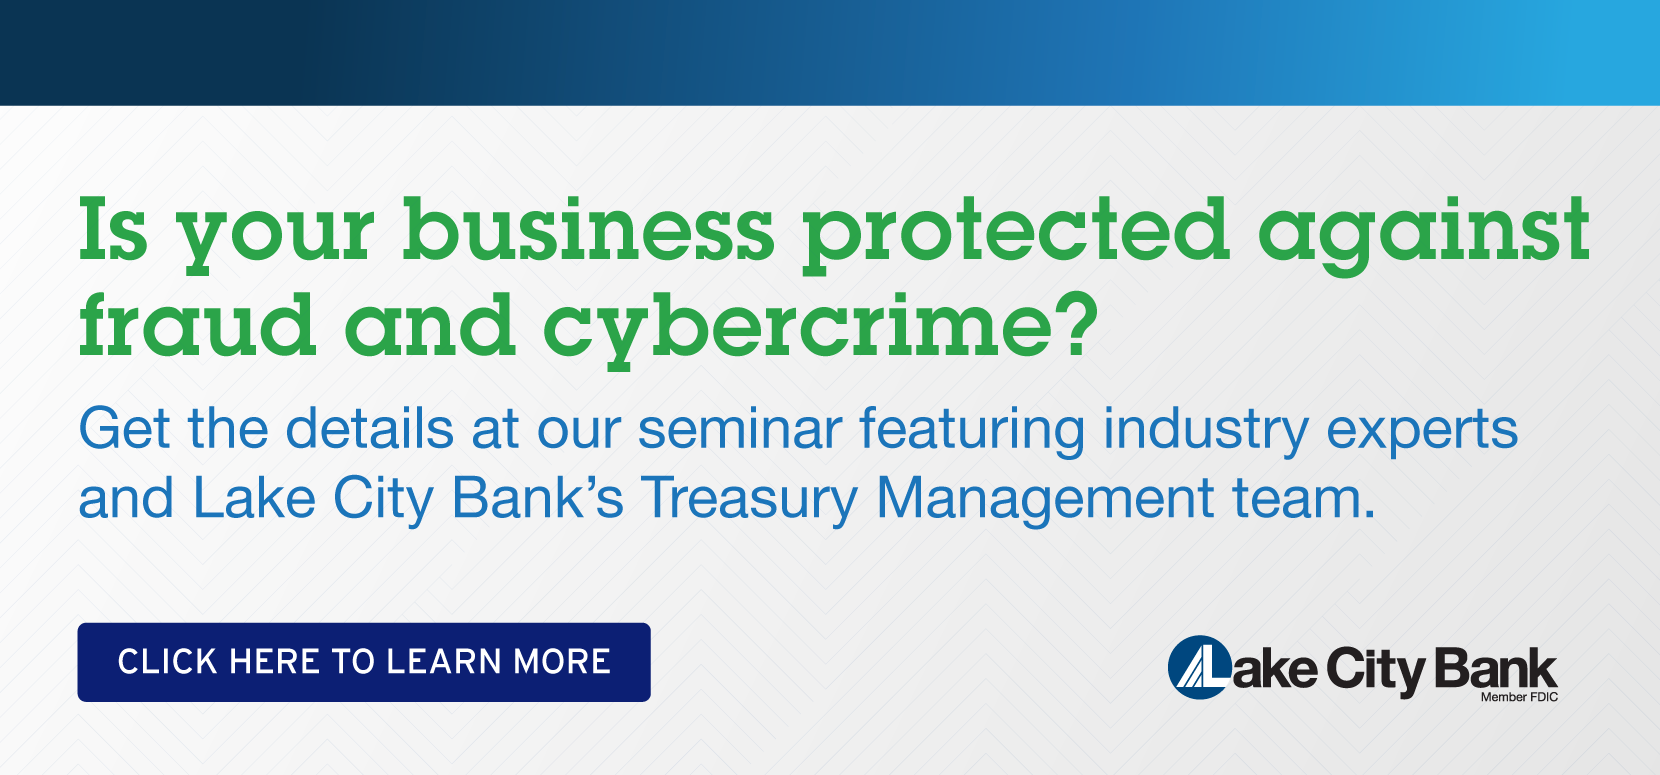 Click here to learn more about our business fraud seminar